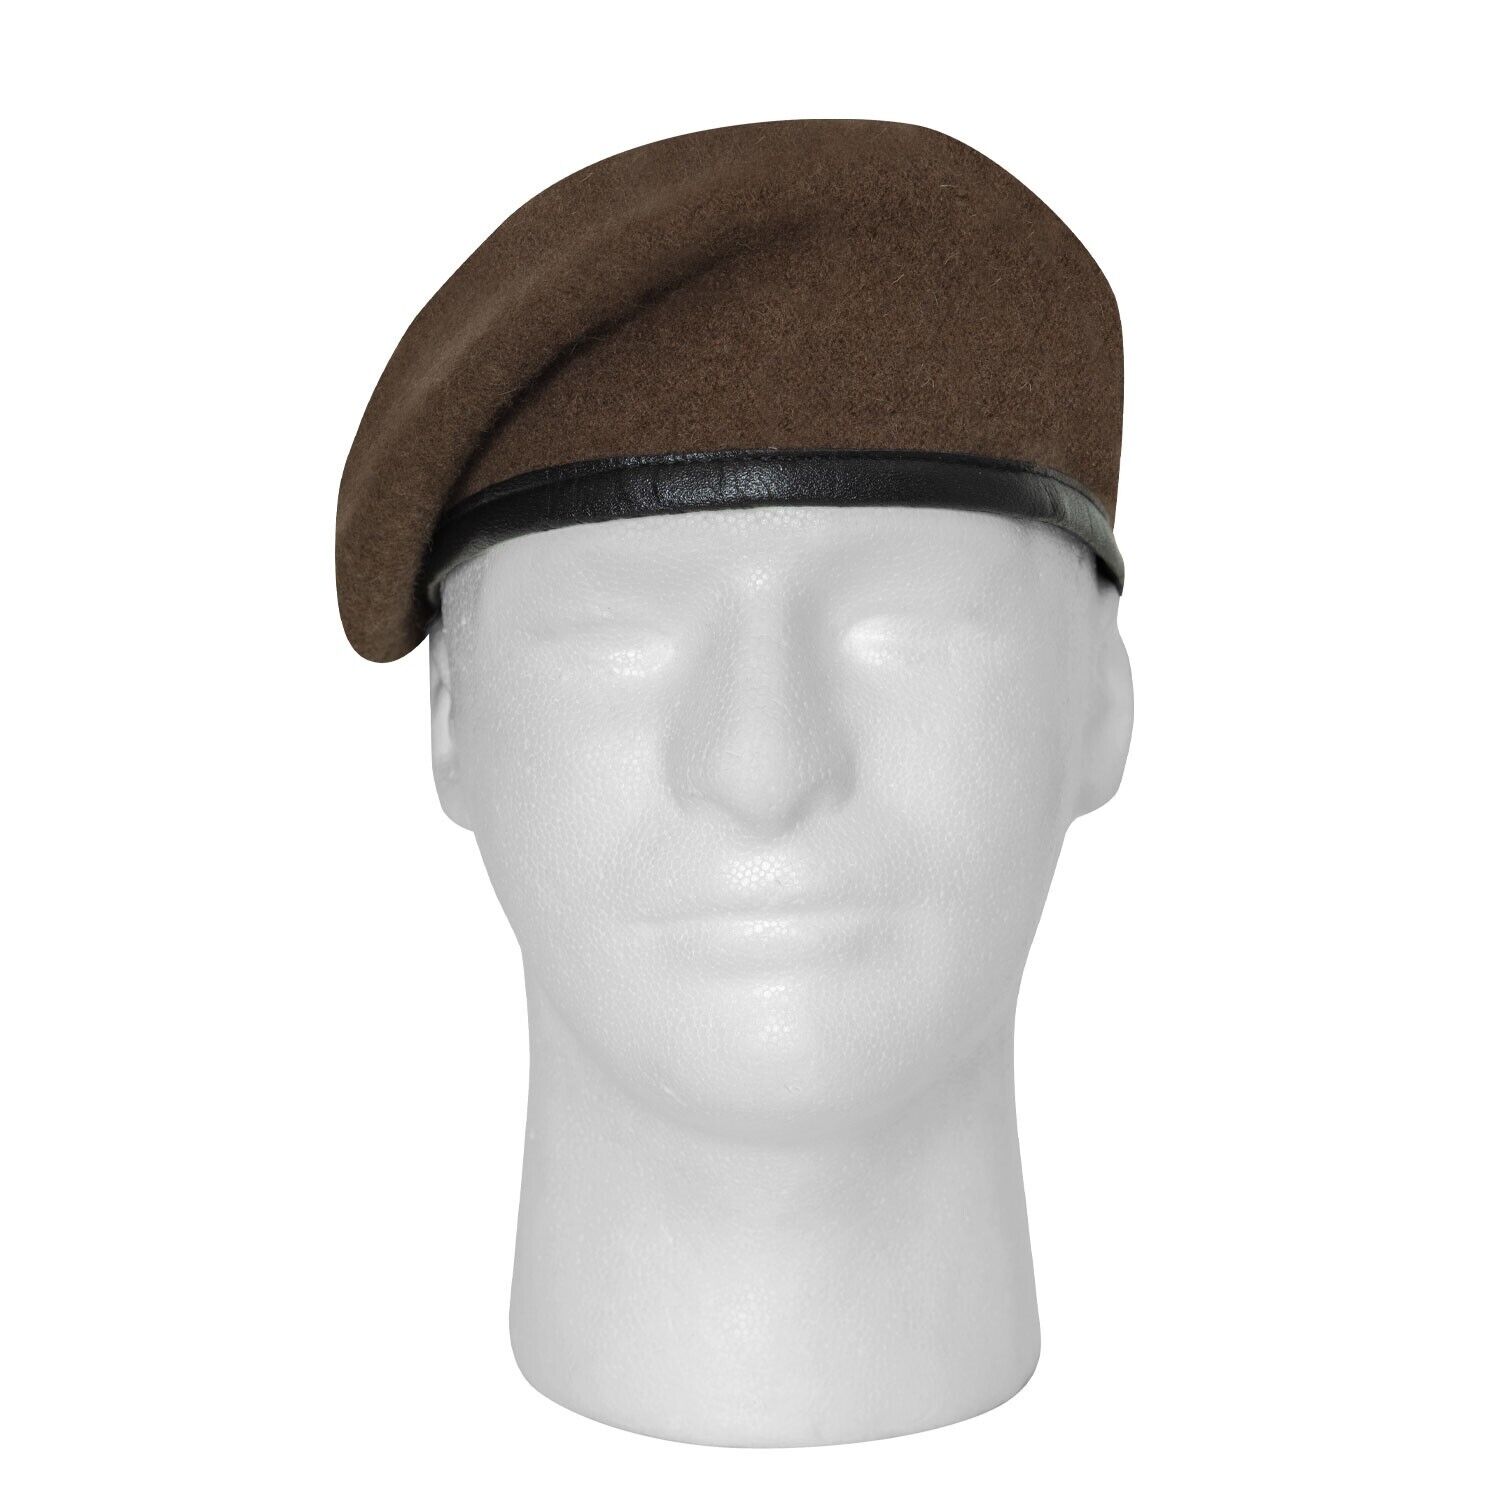 ROTHCO Classic Military Beret Eyelets Army/AIR FORCE Uniform BROWN SIZE 6 5/8